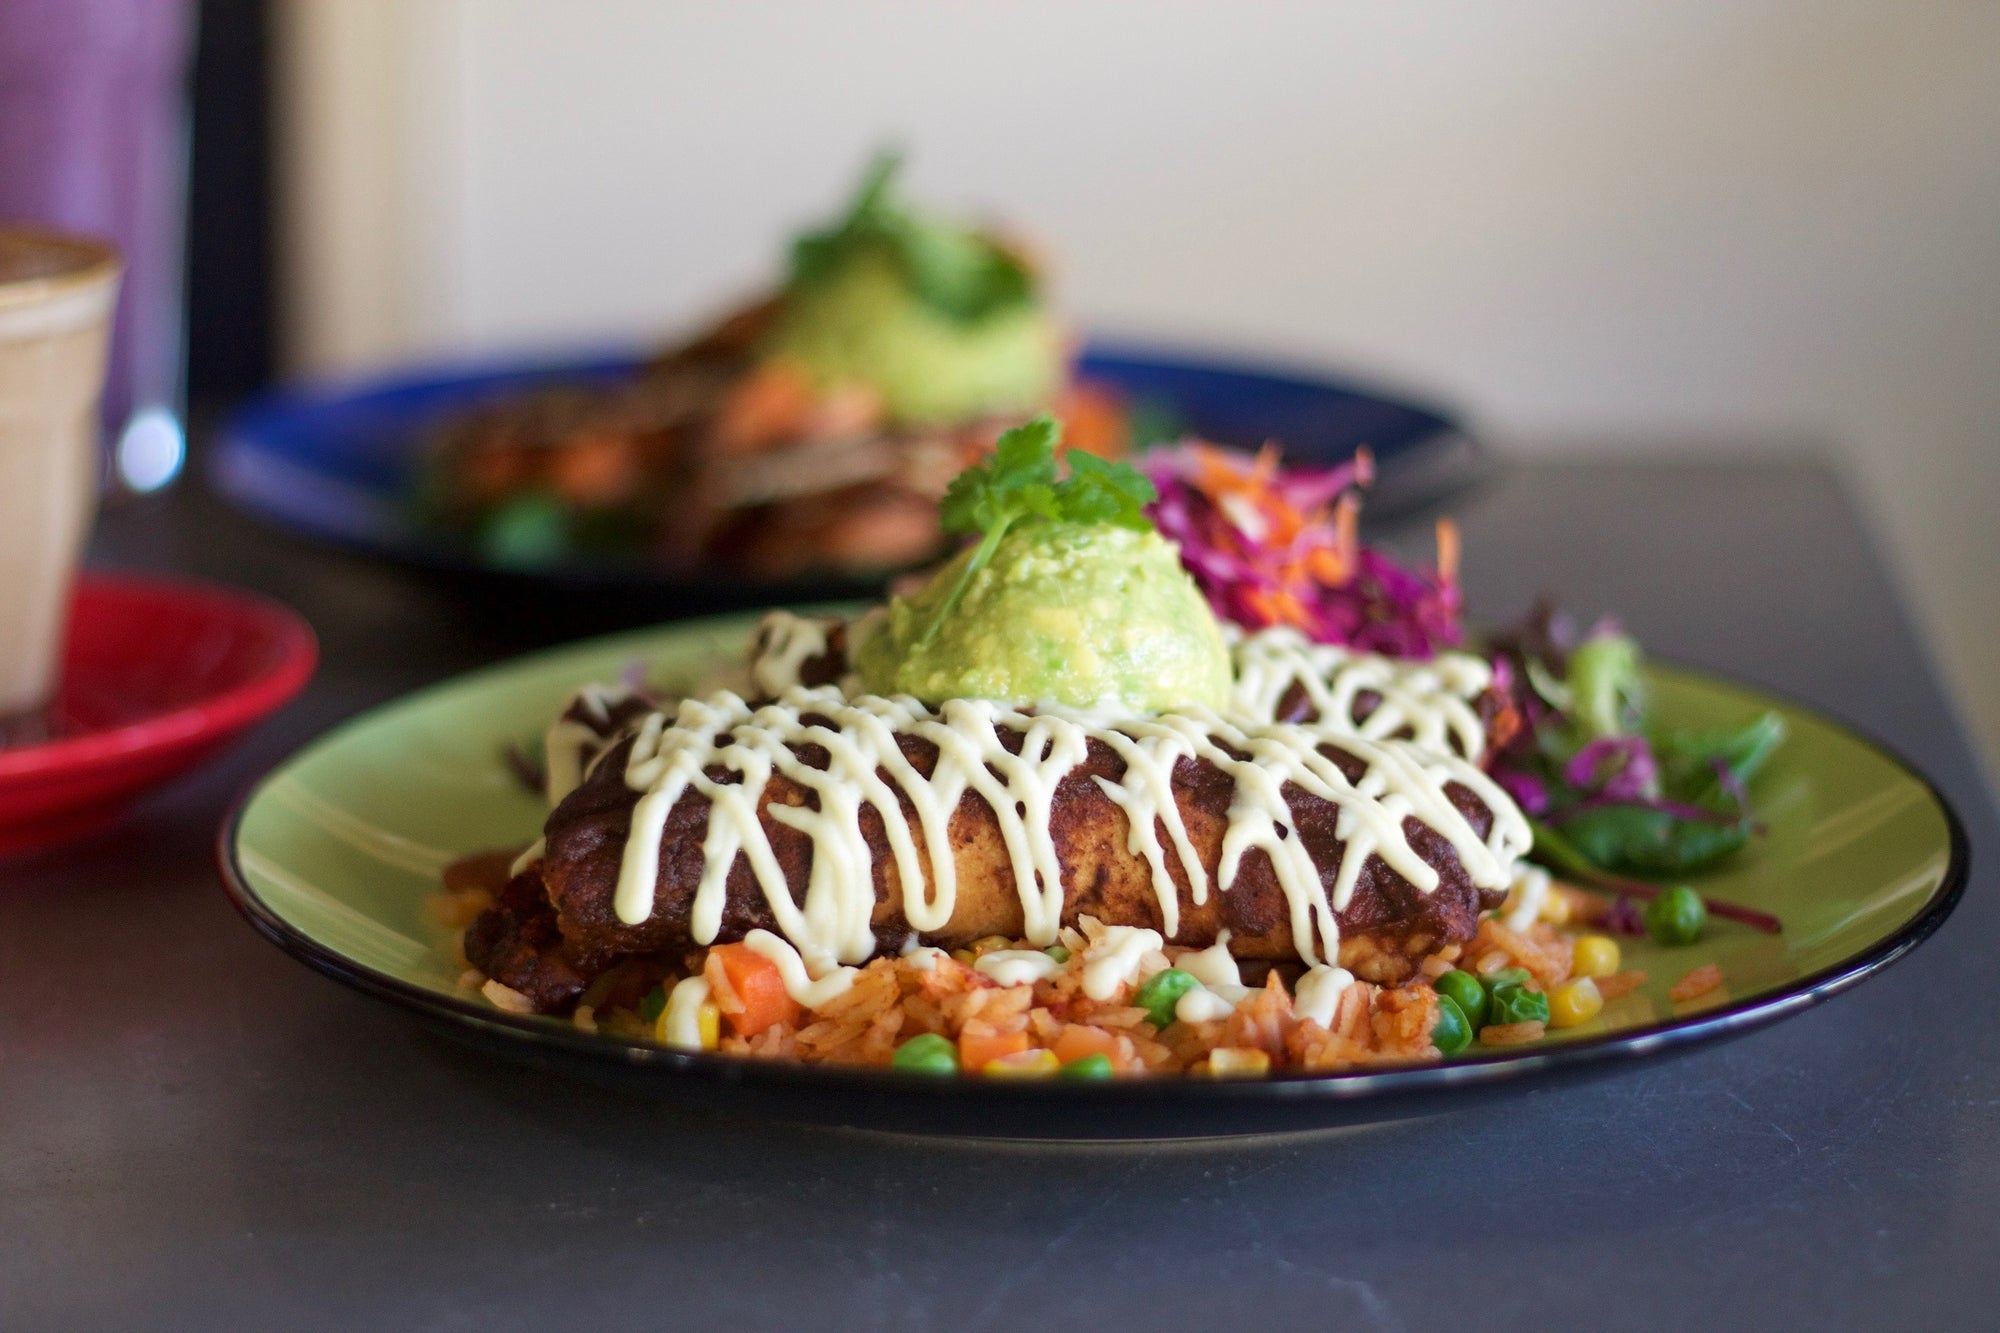 a plate of potato and kale tortilla in an enchilada sauce drizzled with mayonnaise and topped with a scoop of guacamole with a green salad side dish. Behind is another plate of the same content. 